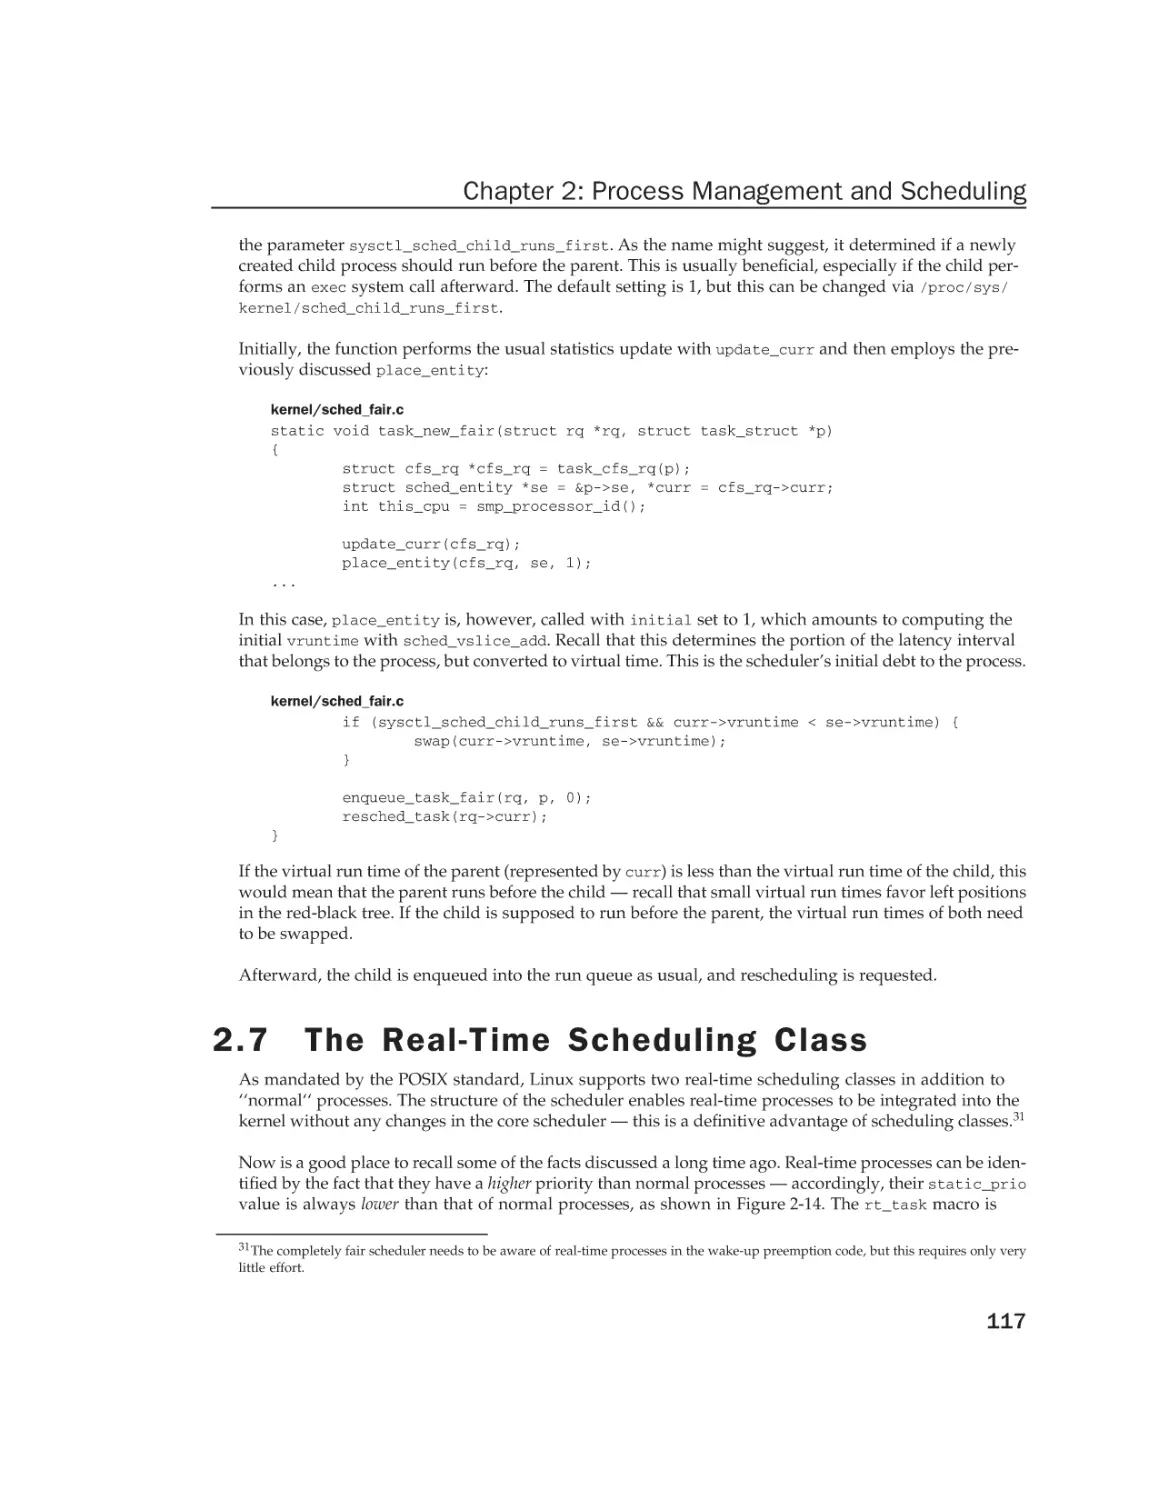 2.7 The Real-Time Scheduling Class